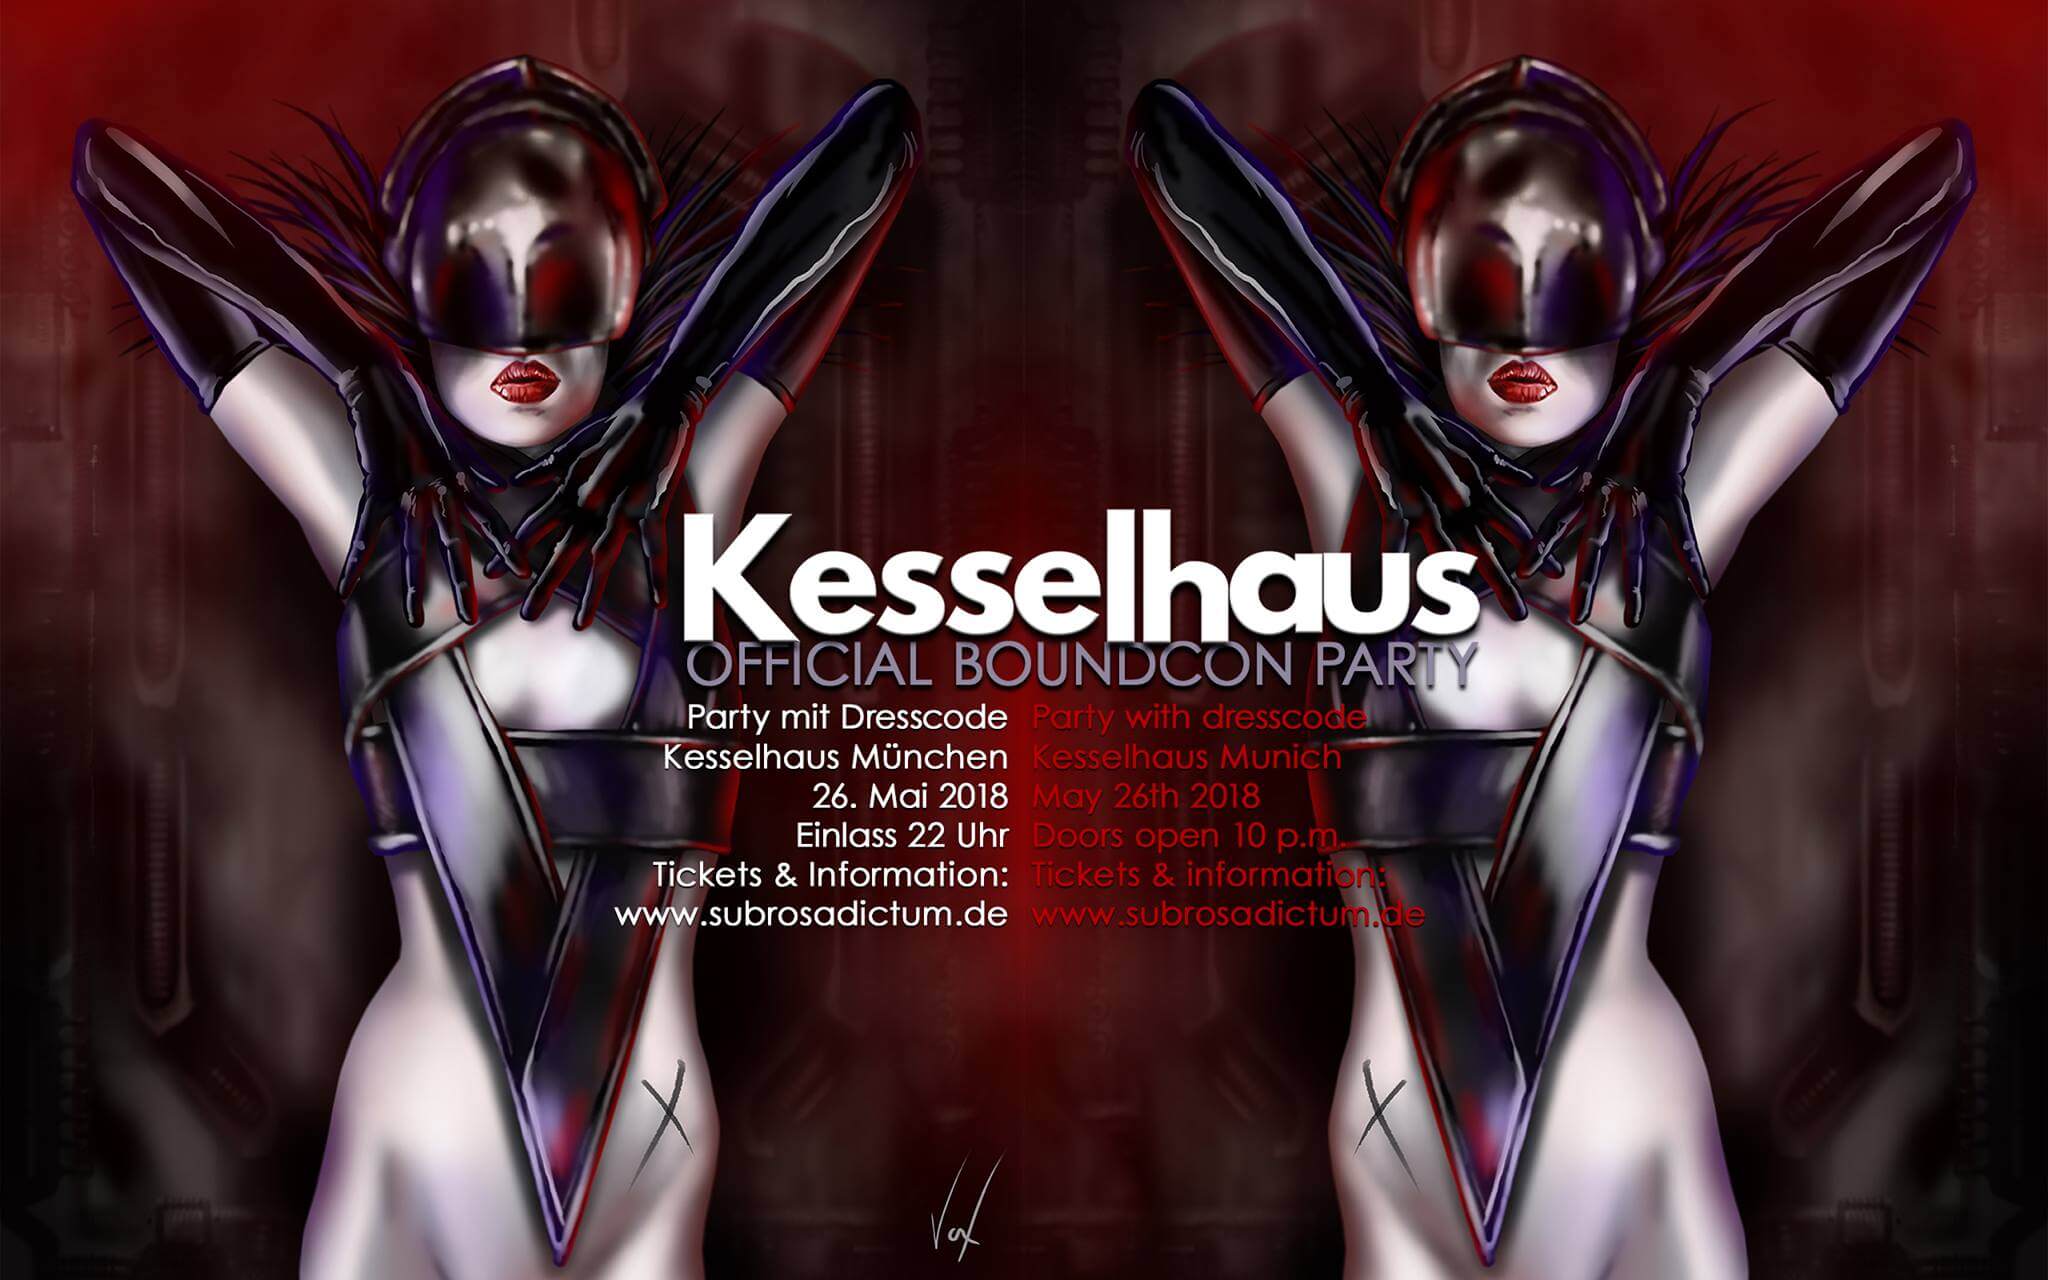 Mistress Amrita Rope Bondage Shows with Dutch Dame
 at nullSubrosadictum Kesselhaus Official Boundcon Party in Munich, Germany on 26 May 2018